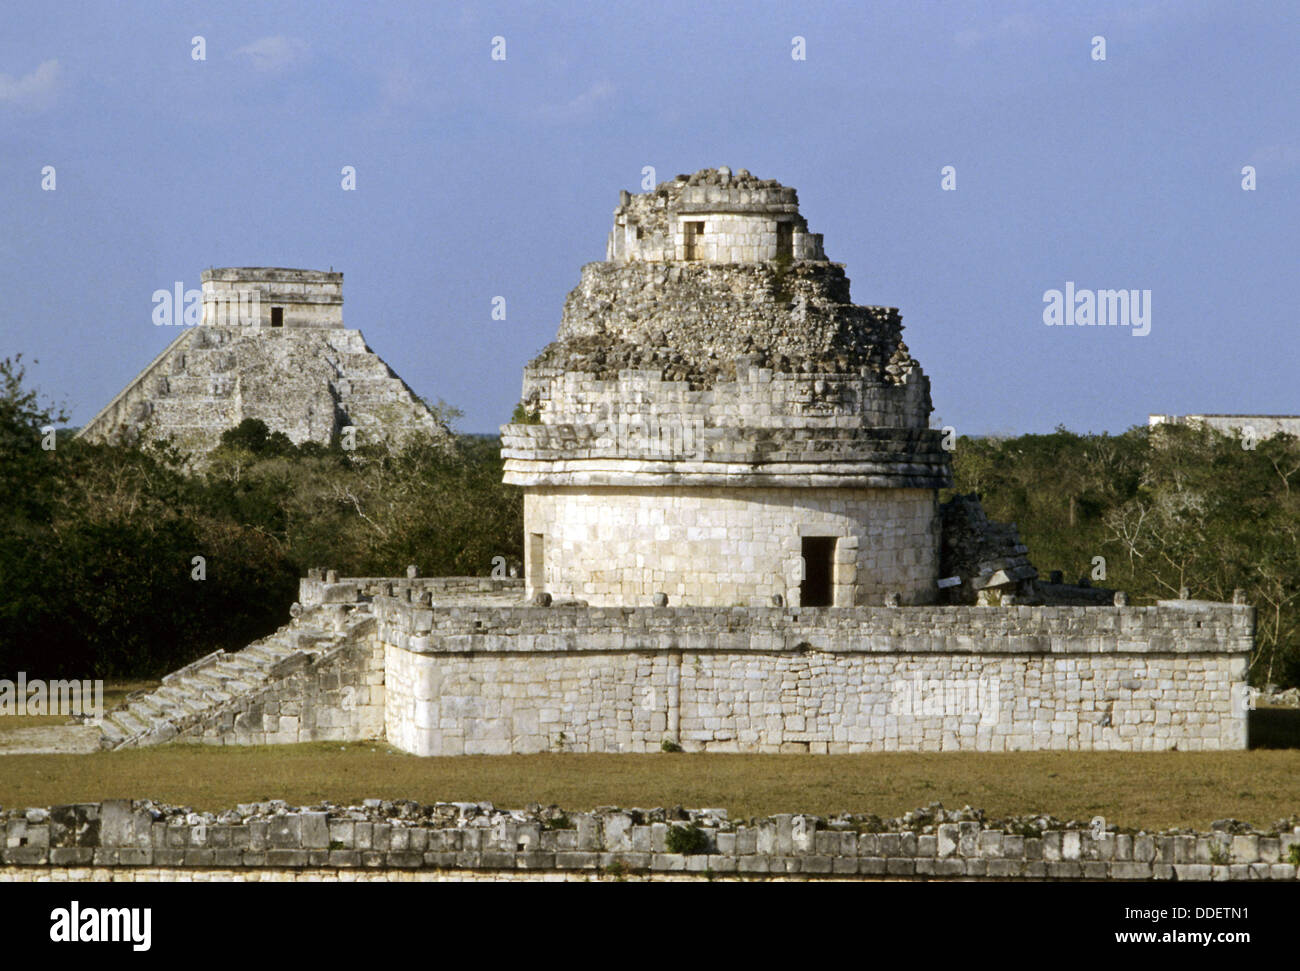 El Caracol (means ´snail´ or ´winding staircase) observatory tower and pyramid of Kukulcan in background, Mayan ruins of Stock Photo